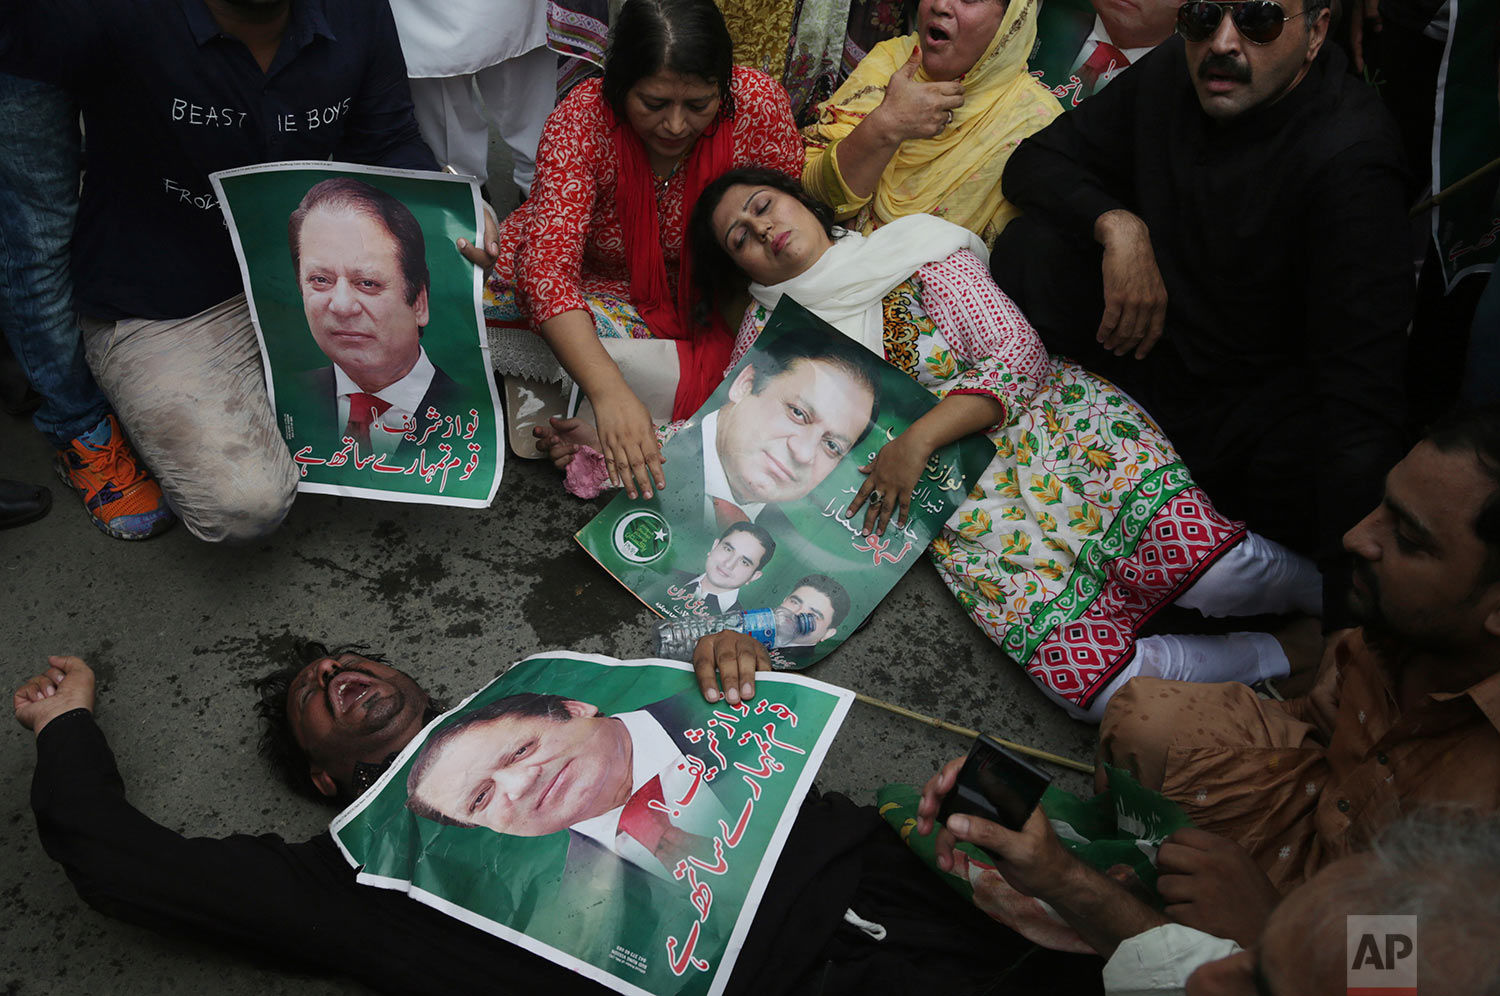 Supporters of the Pakistani ruling party Muslim League headed by Nawaz Sharif gesture during rally to condemn the dismissal of their leader in Lahore, Pakistan, Pakistan, Friday, July 28, 2017. Pakistan's Supreme Court in a unanimous decision has asked the country's anti-corruption body to file corruption charges against Sharif, his two sons and daughter for concealing their assets. (AP Photo/K.M. Chaudary)